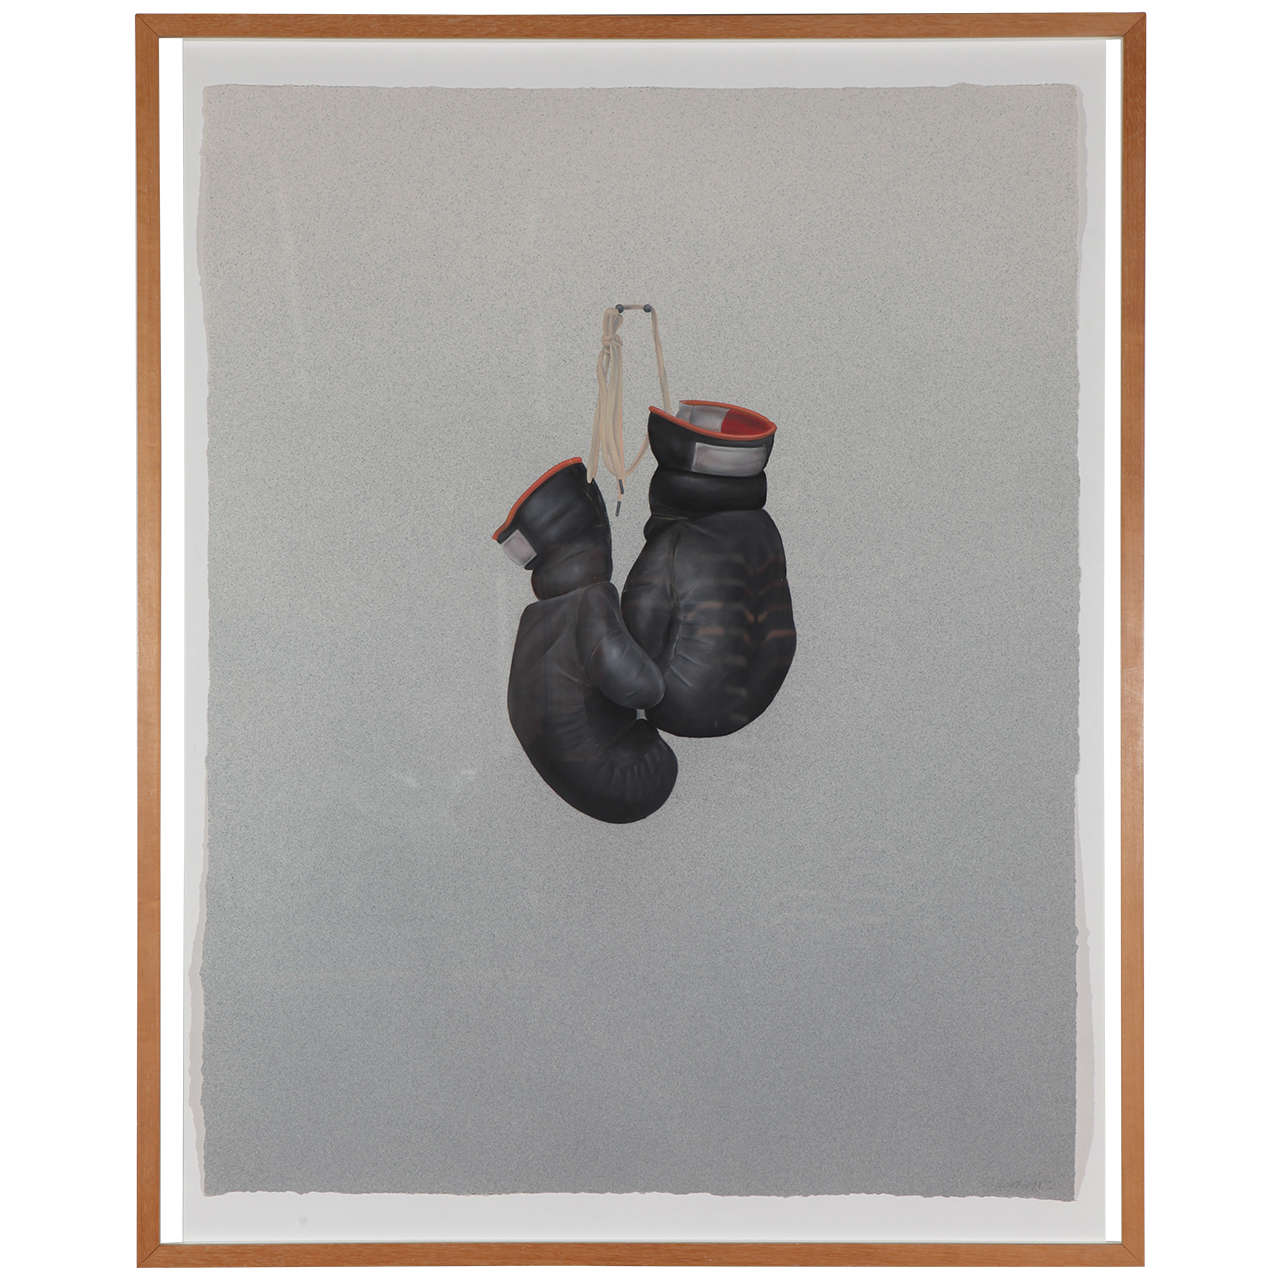 "Free For All" Boxing gloves photograhy by Bruce Richards, 1982-1983